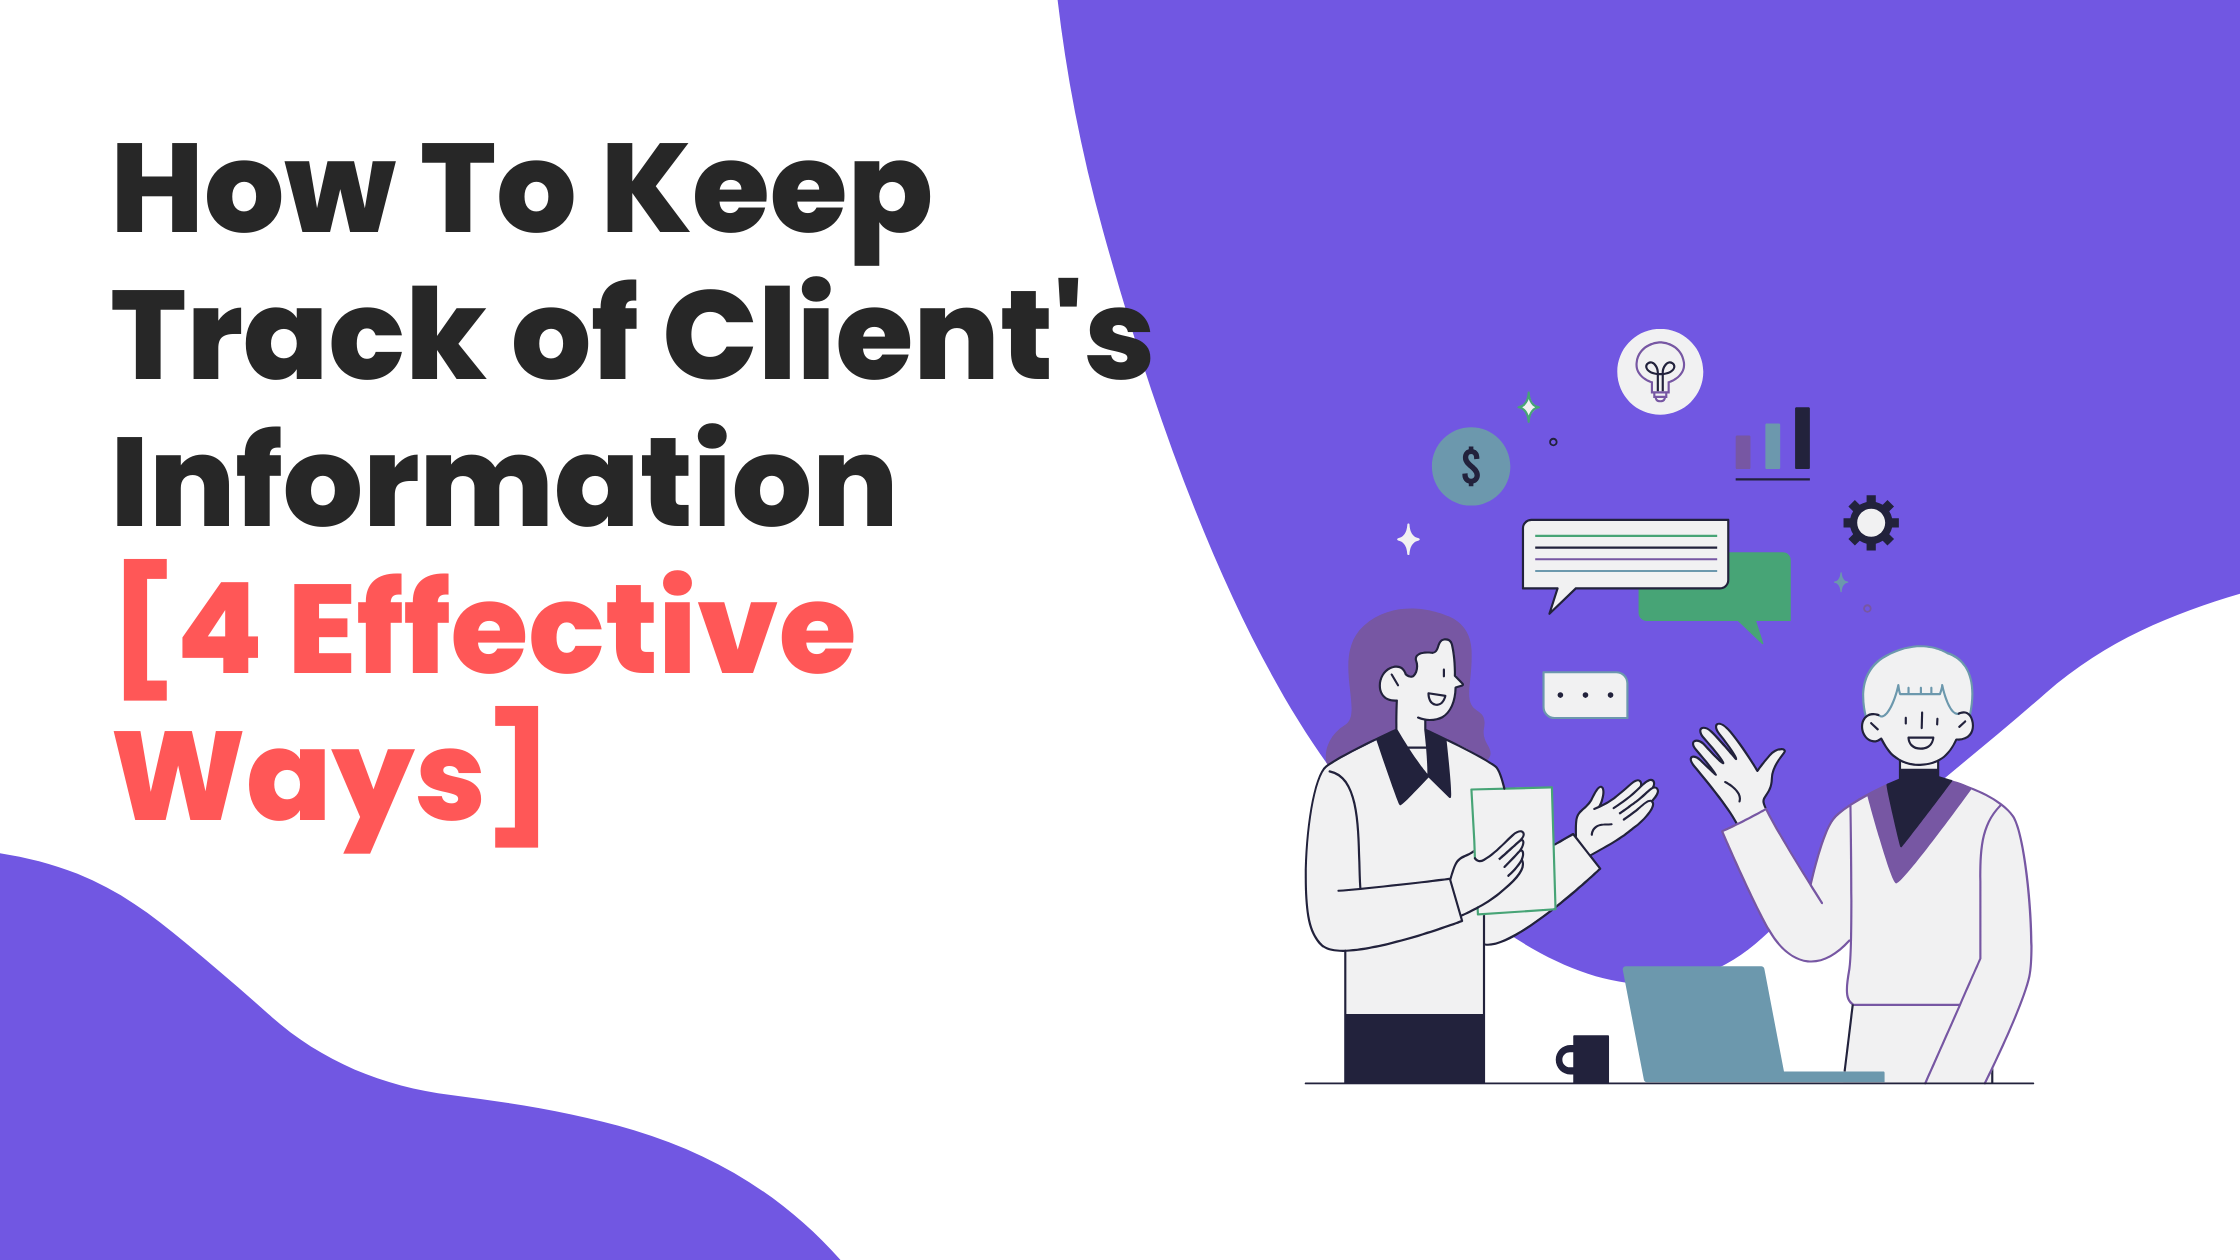 How To Keep Track of Client’s Information [4 Effective Ways]